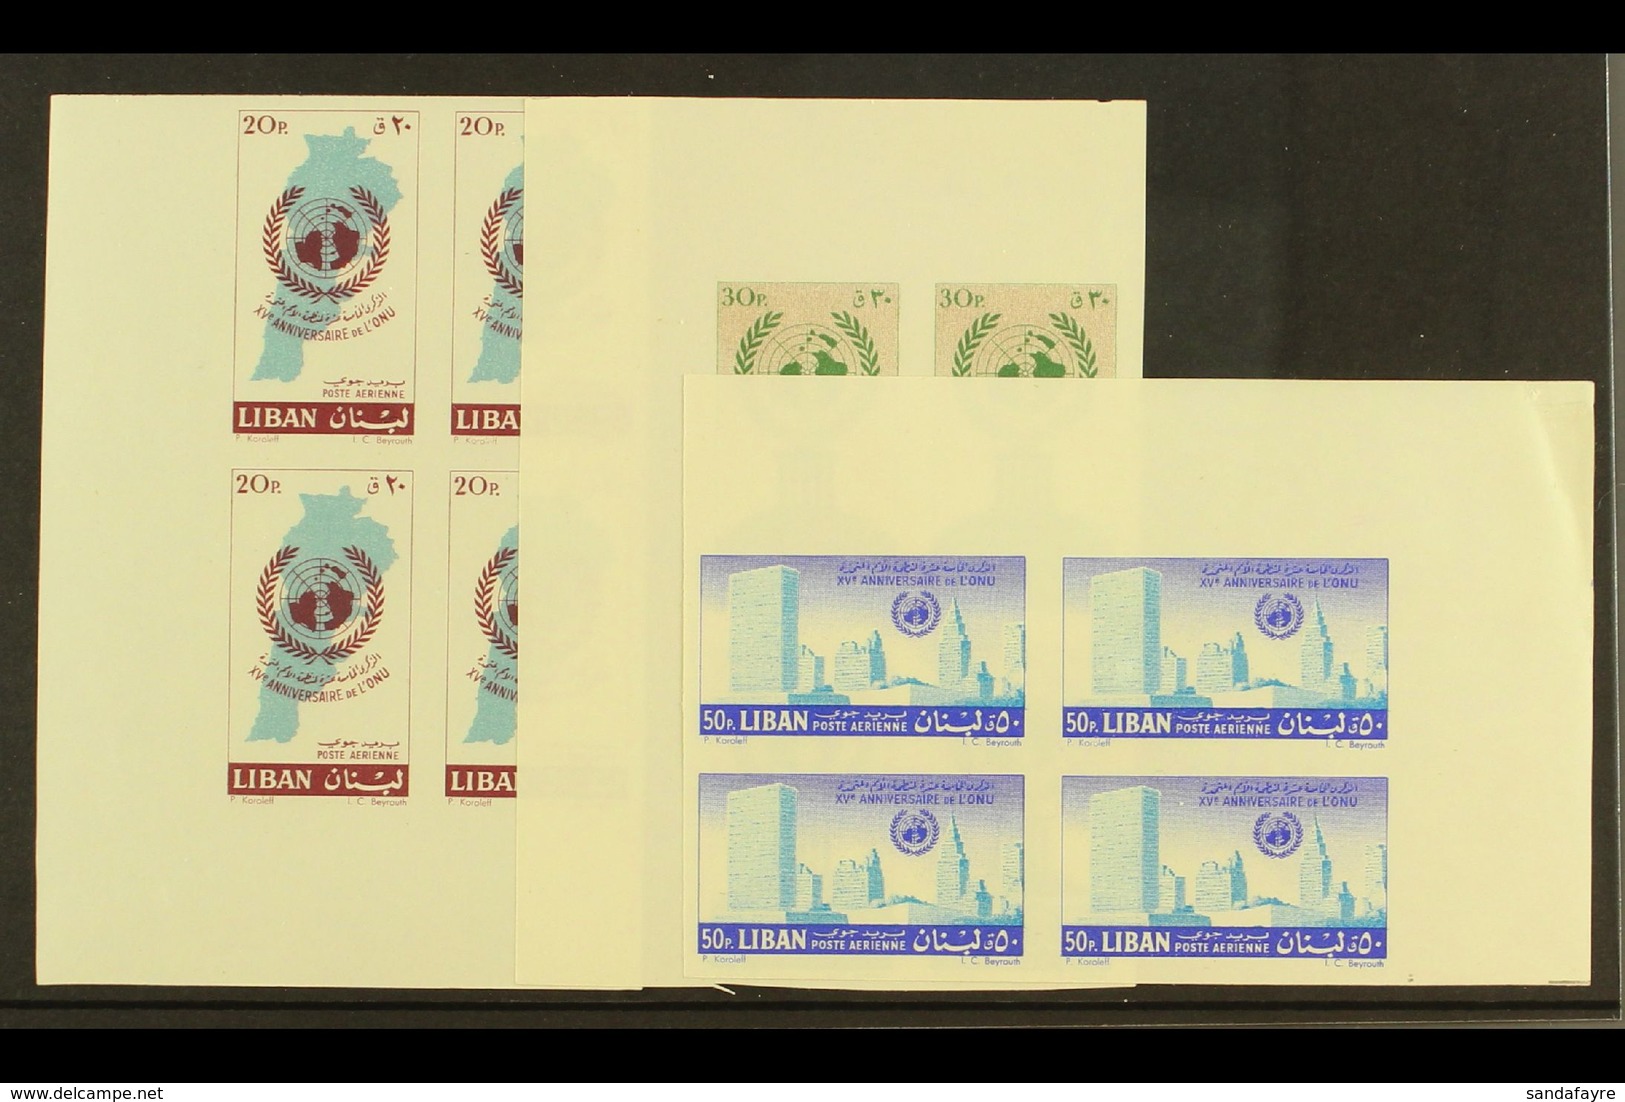 1961 Anniversary Of The United Nations IMPERFORATE Set (as SG 683/85) Never Hinged Mint CORNER BLOCKS OF FOUR (12 Stamps - Libanon